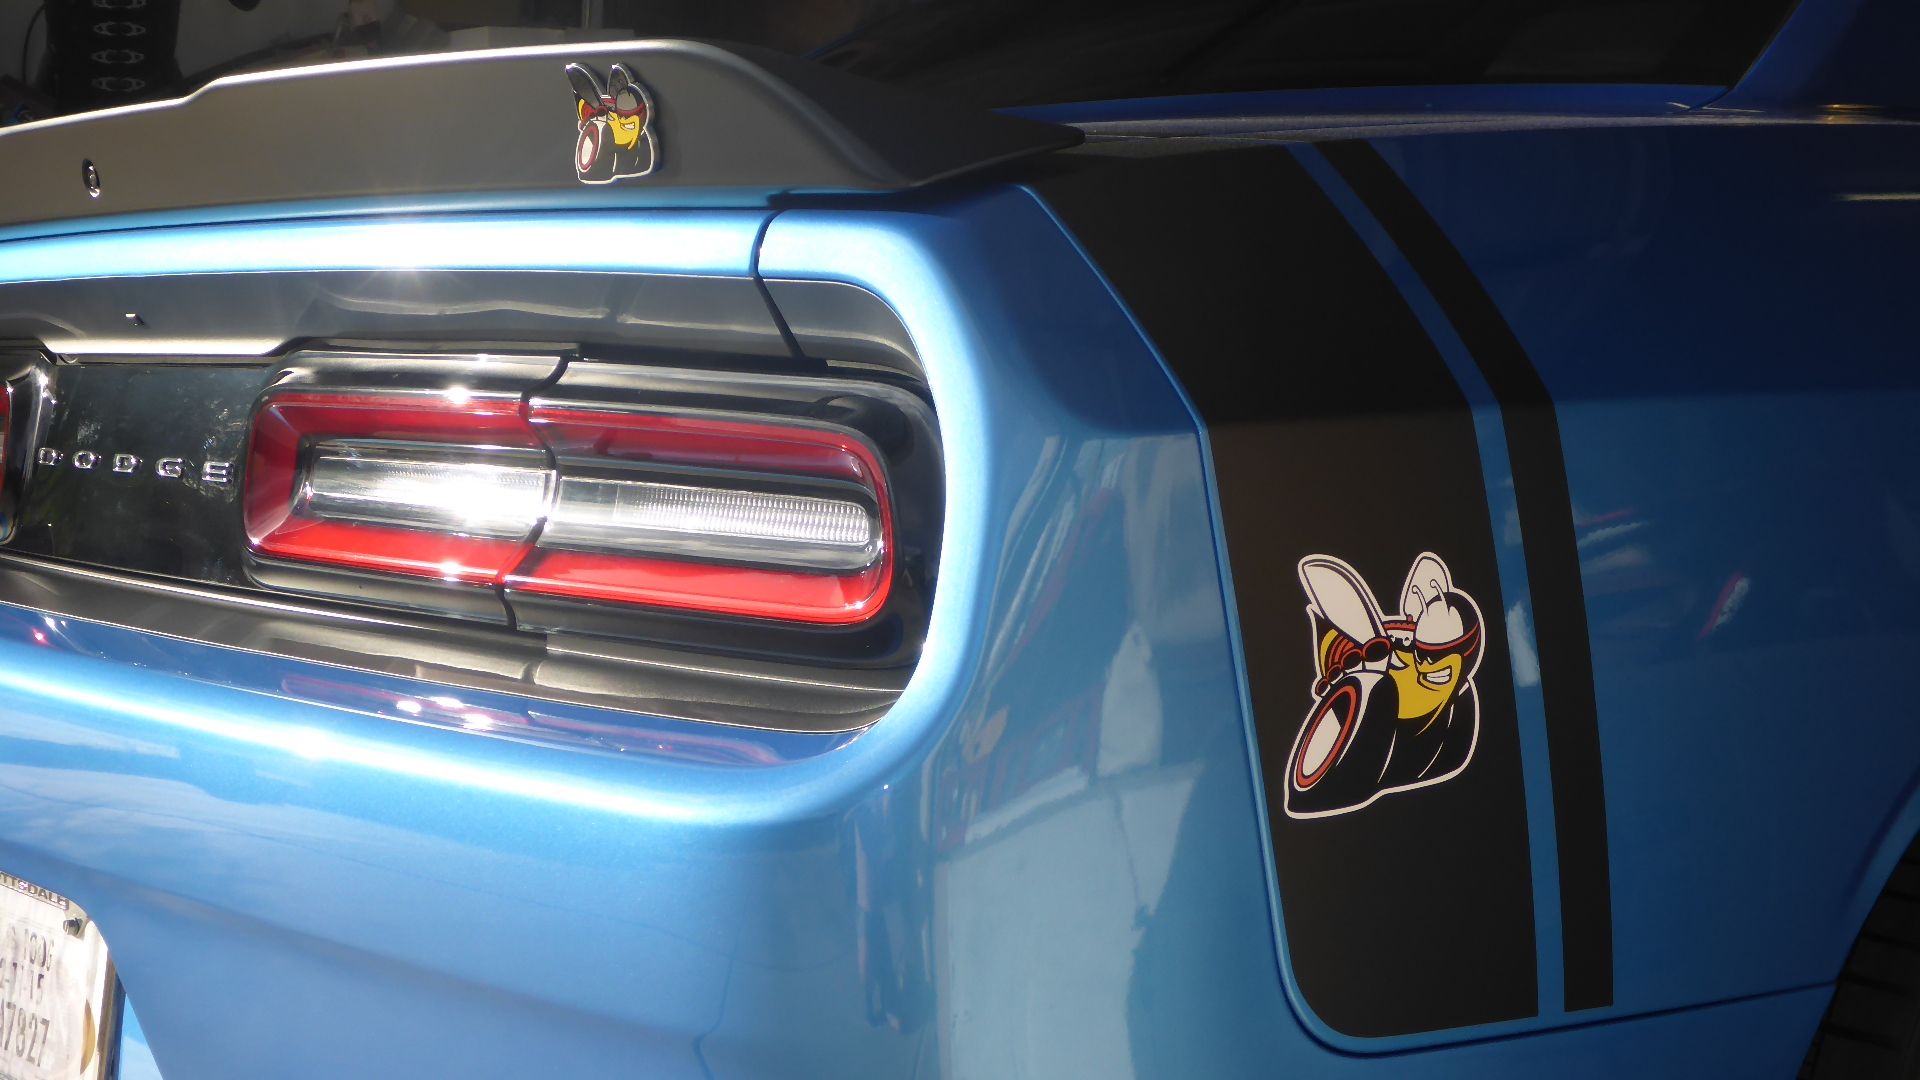 Dodge Challenger rear with Scat Pack decals